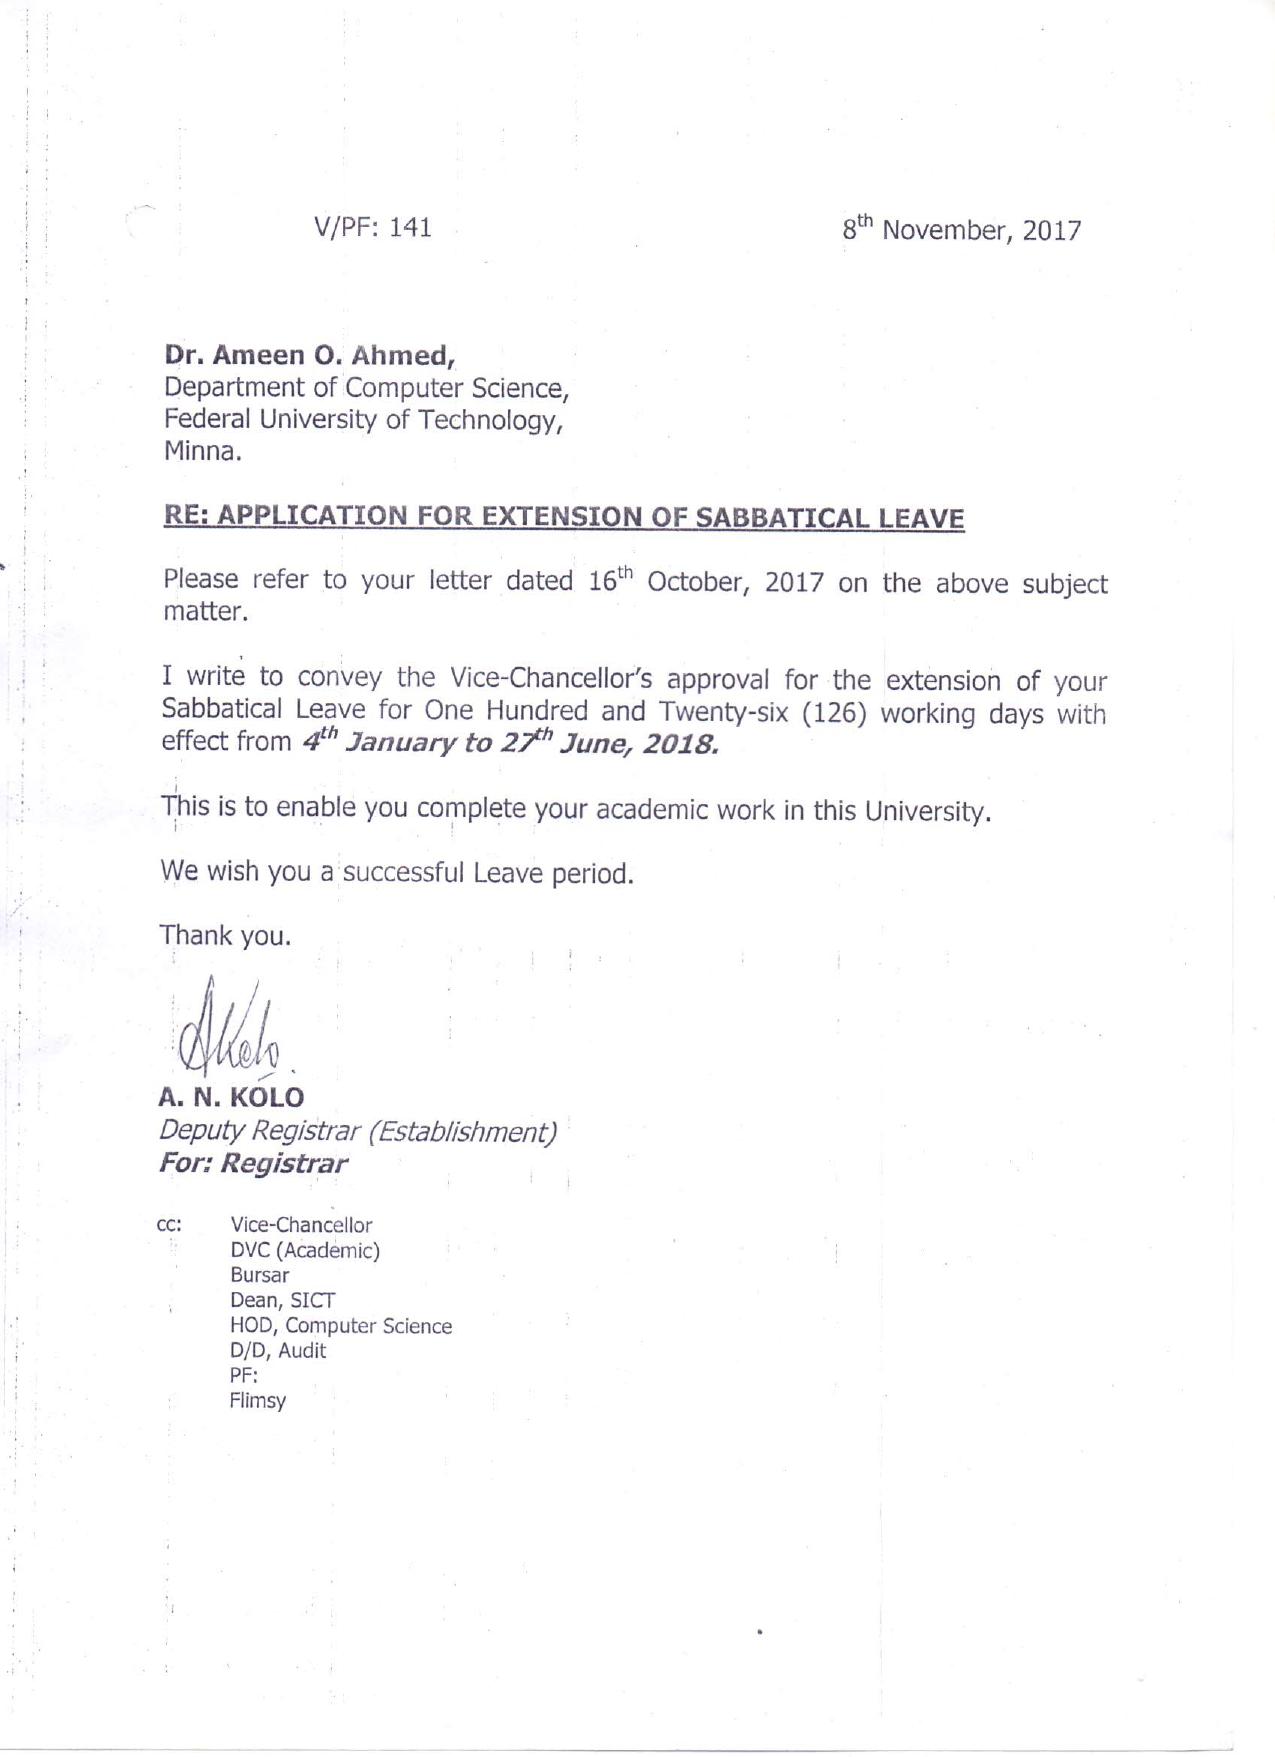 Approved letter of extention of sabbatical leave